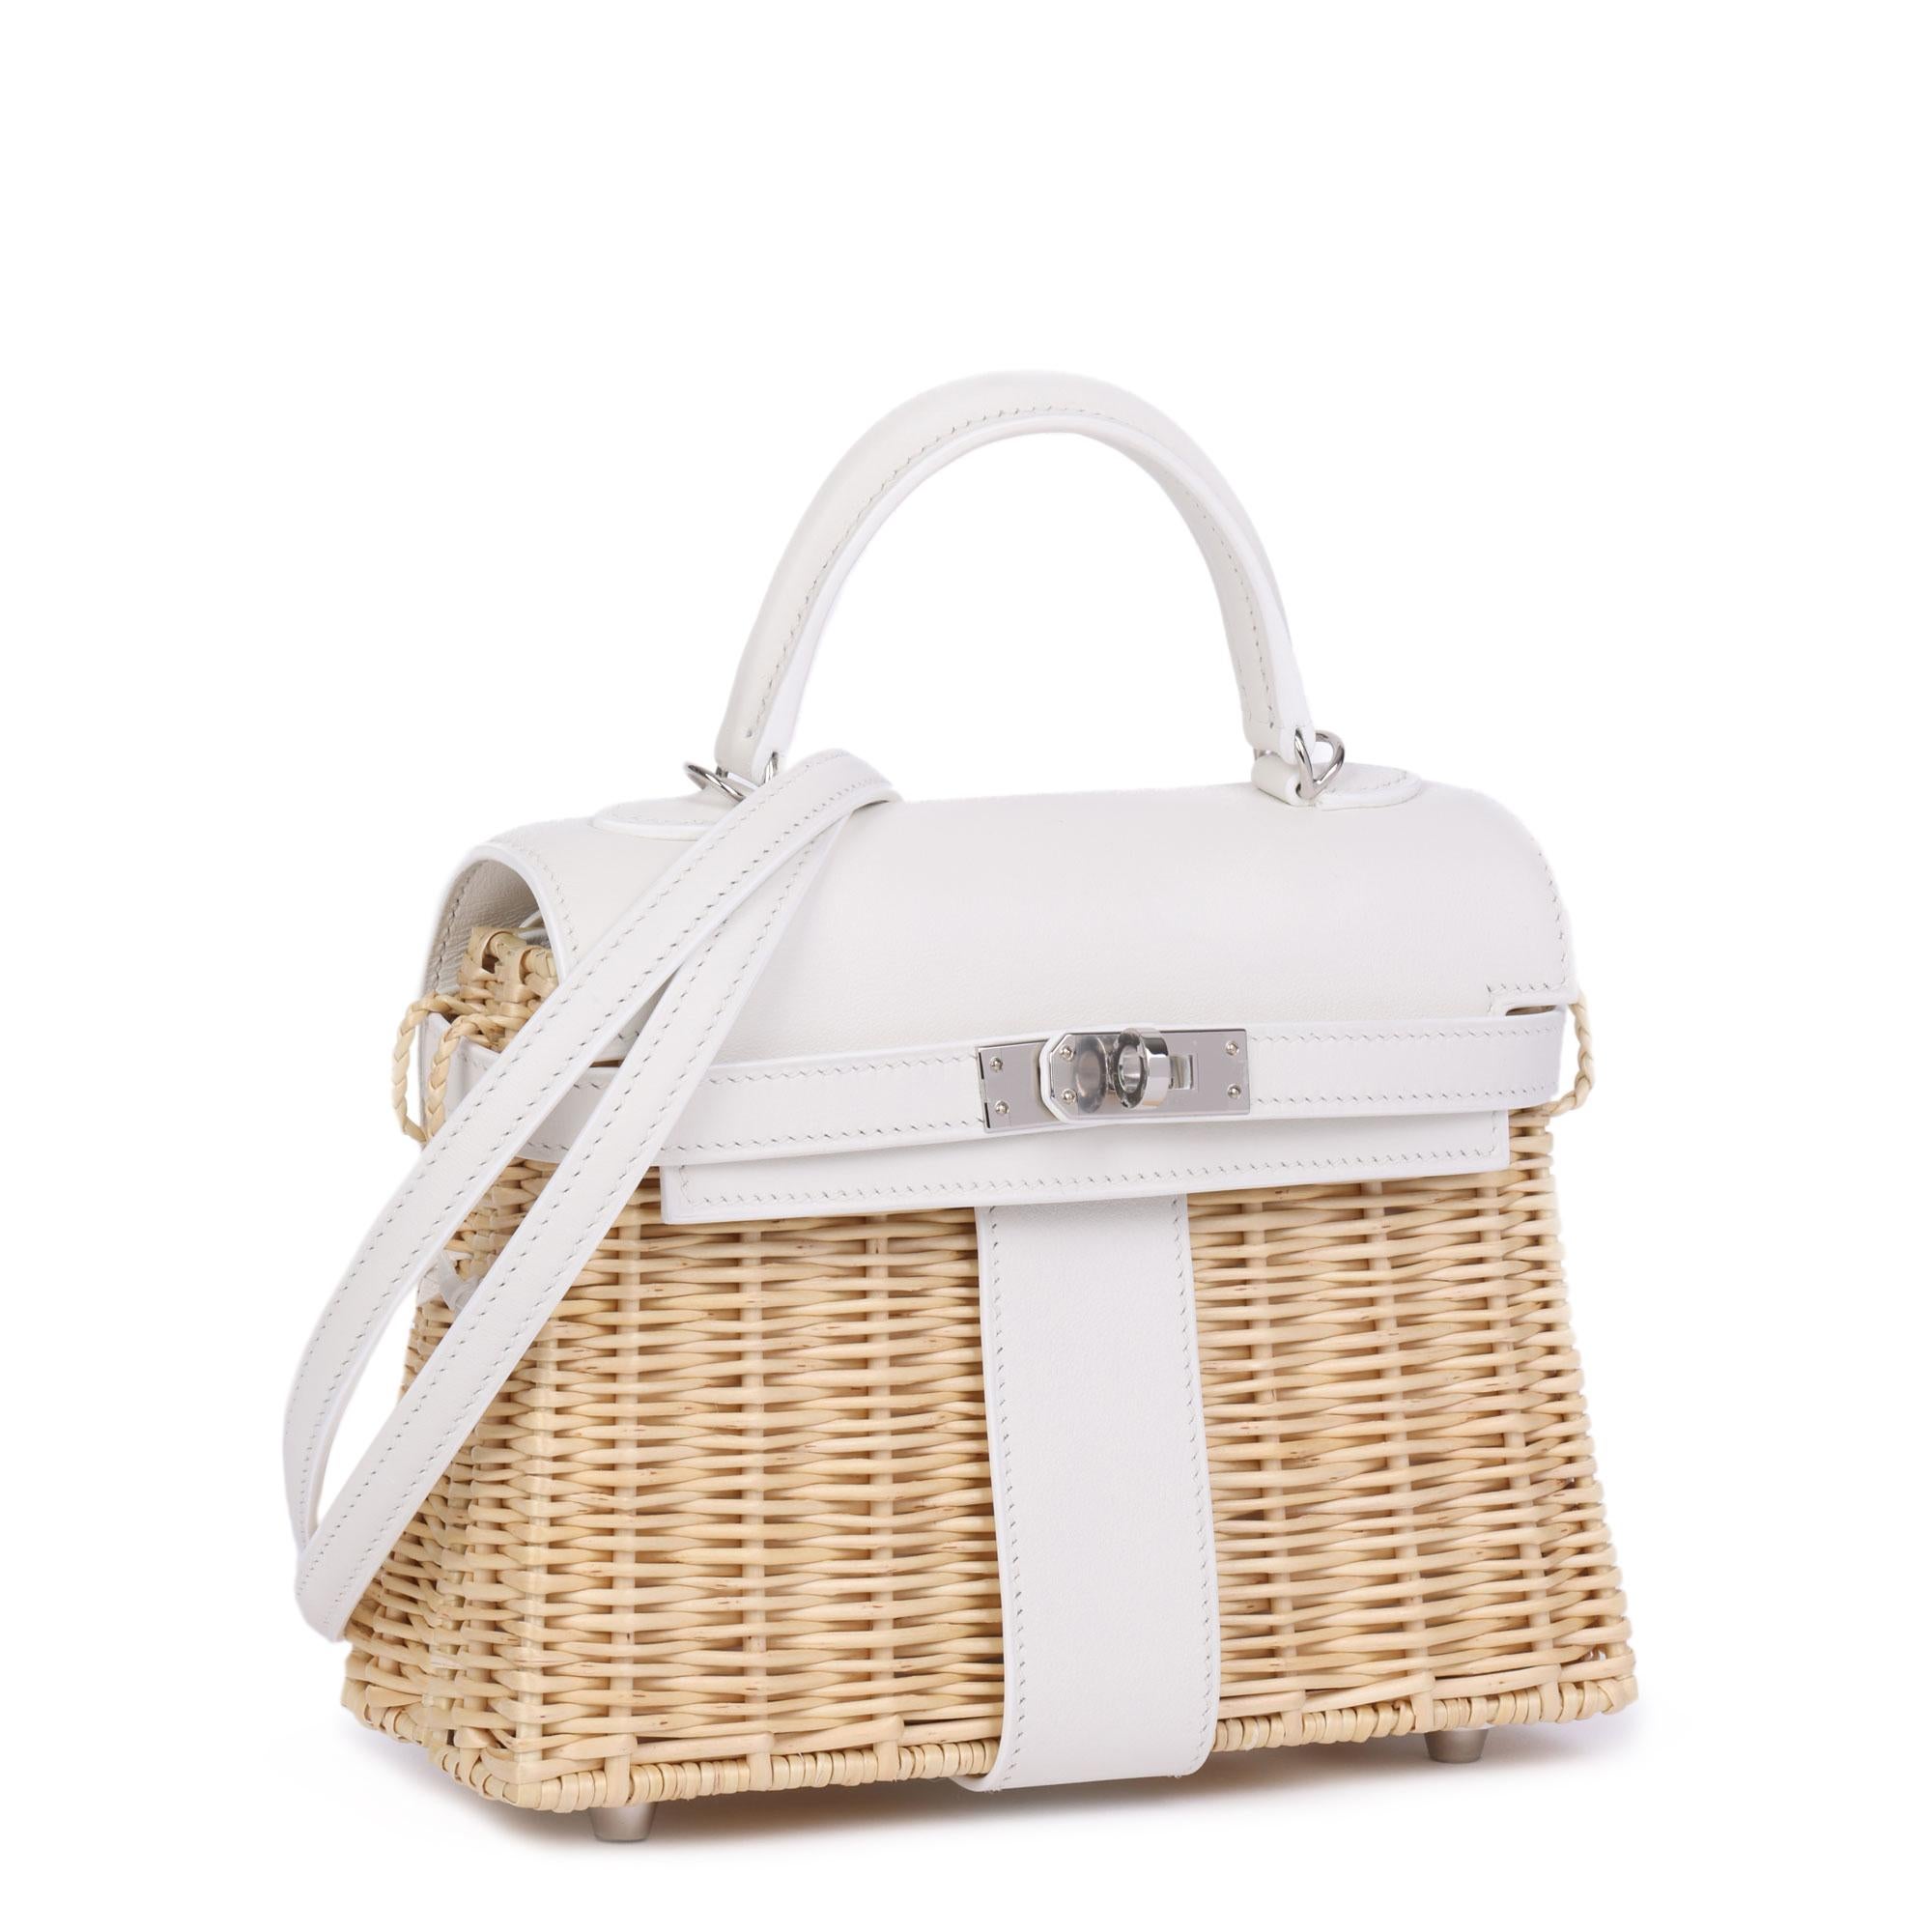 HERMÈS
White Swift Leather & Woven Osier Whicker Mini Kelly Picnic 

Xupes Reference: CB399
Serial Number: Z
Age (Circa): 2021
Accompanied By: Hermès Dust Bag, Box, Lock, Keys, Clochette, Care Booklet, Shoulder Strap, Hermes Invoice
Authenticity